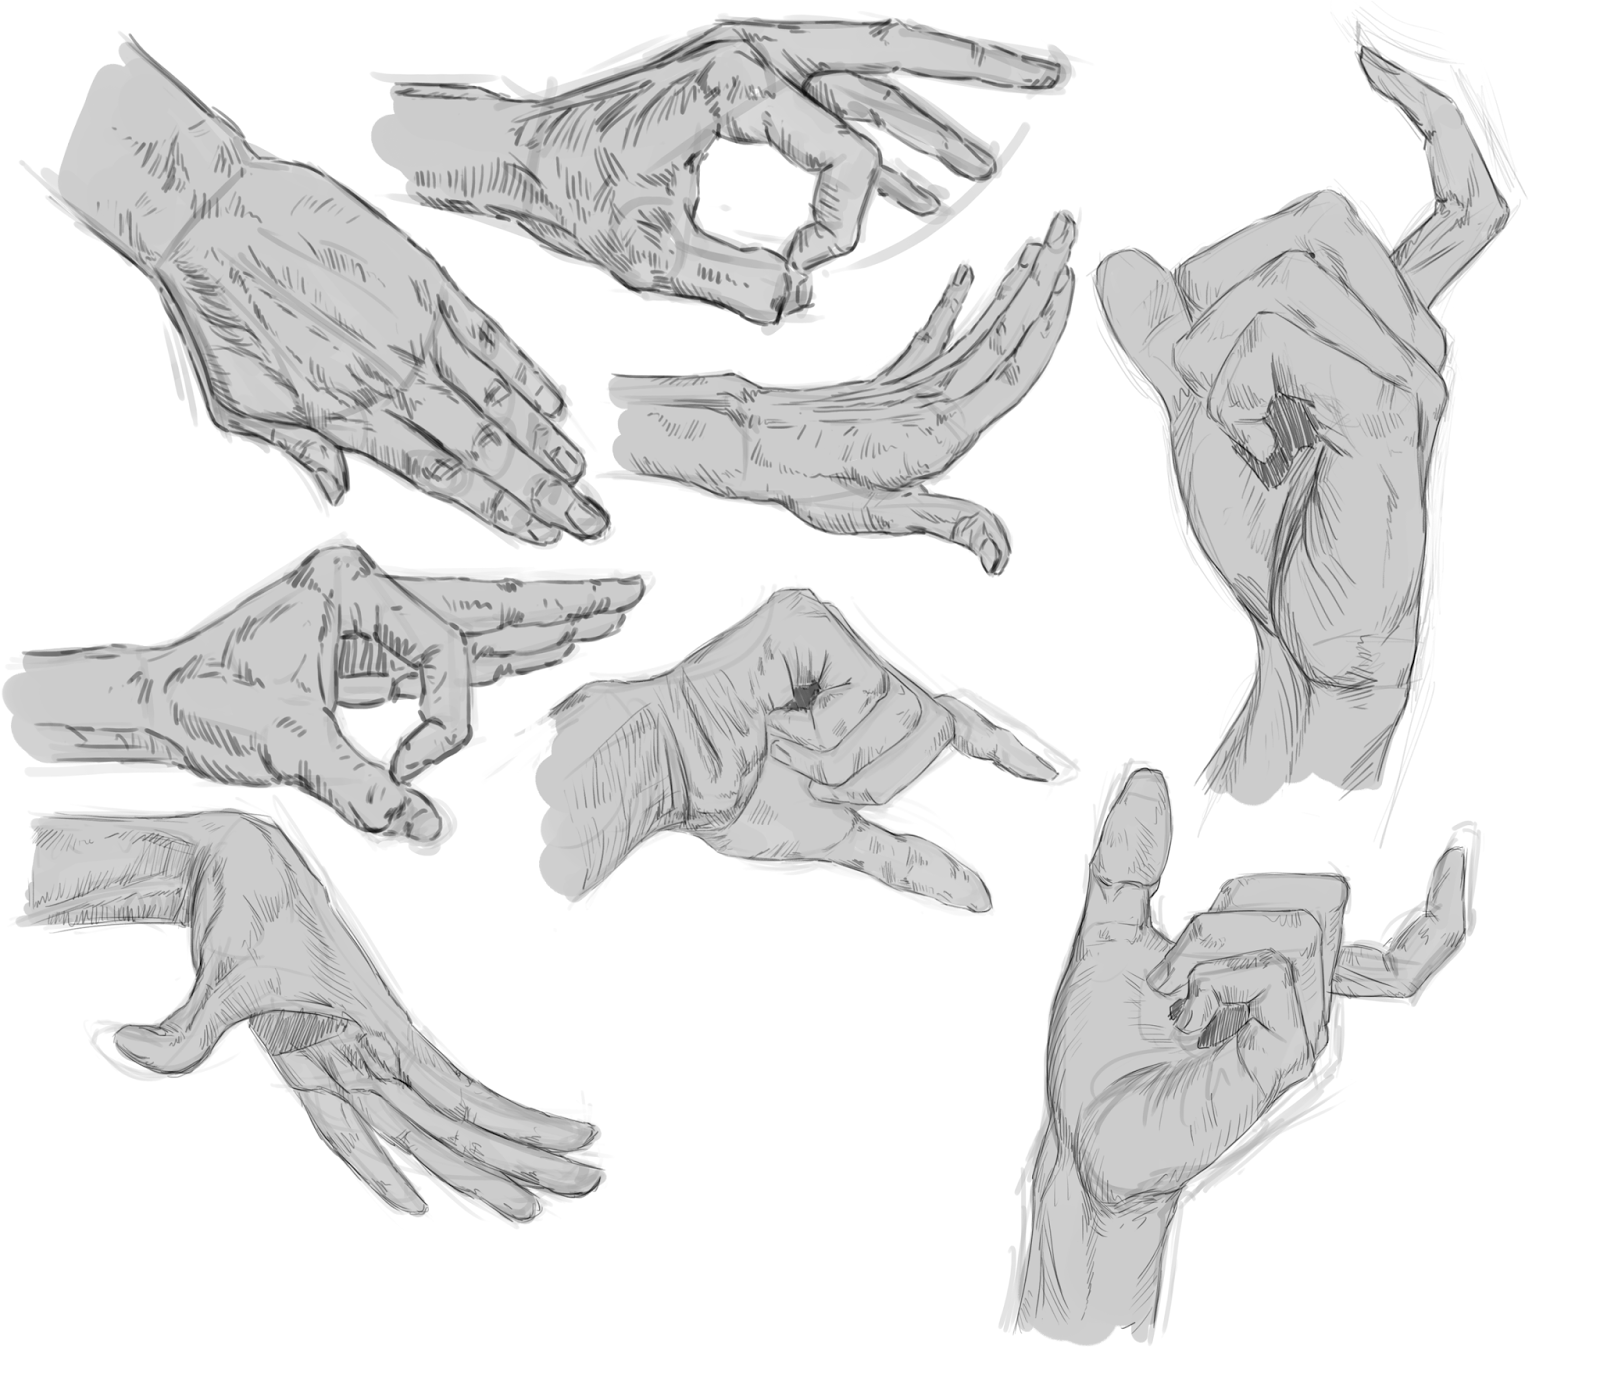 [Image: 2016_09_12_hands.PNG]